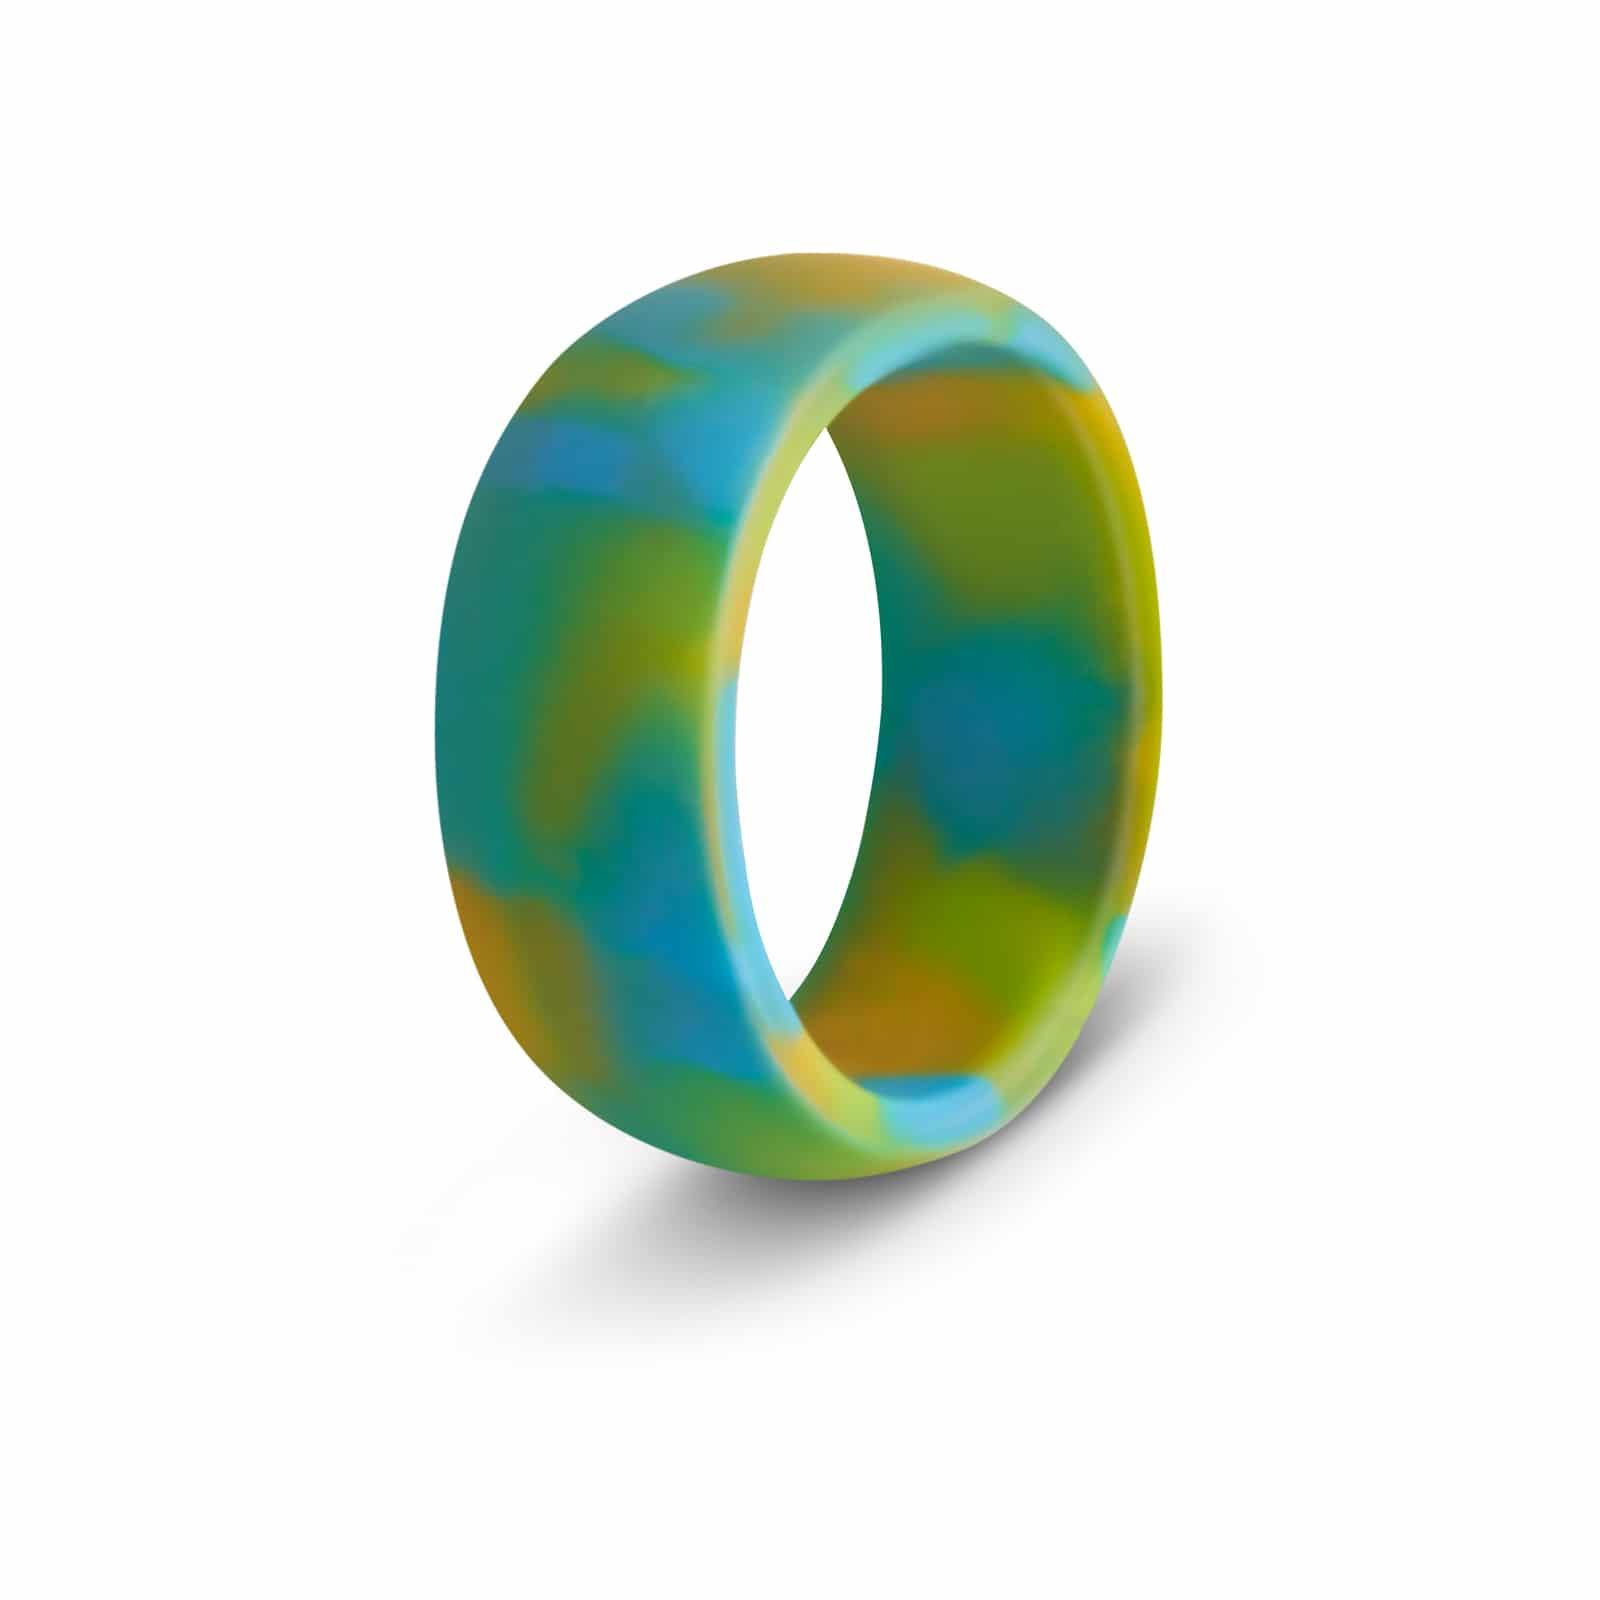 BOTTHMS Ocean Flow Silicone Ring in Yellow & Turquoise - Men's Wedding Band